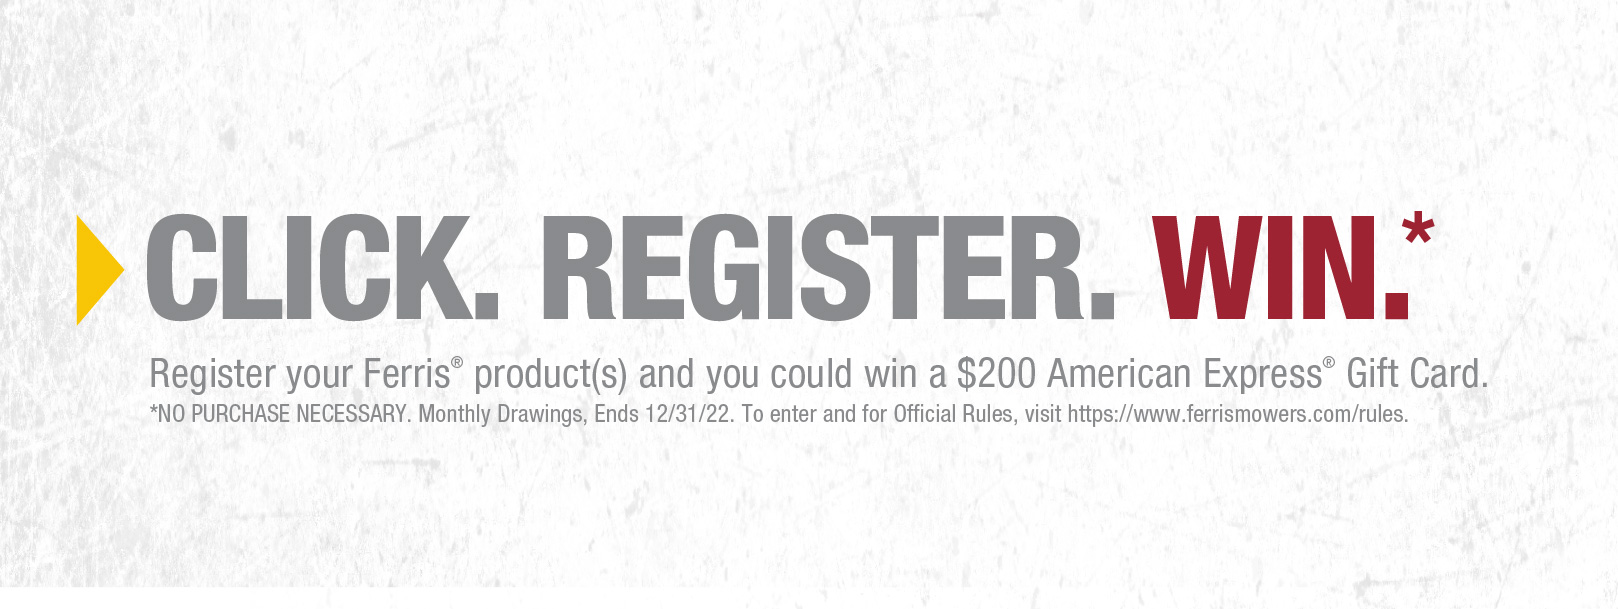 Click. Register. Win. Sweepstakes graphics